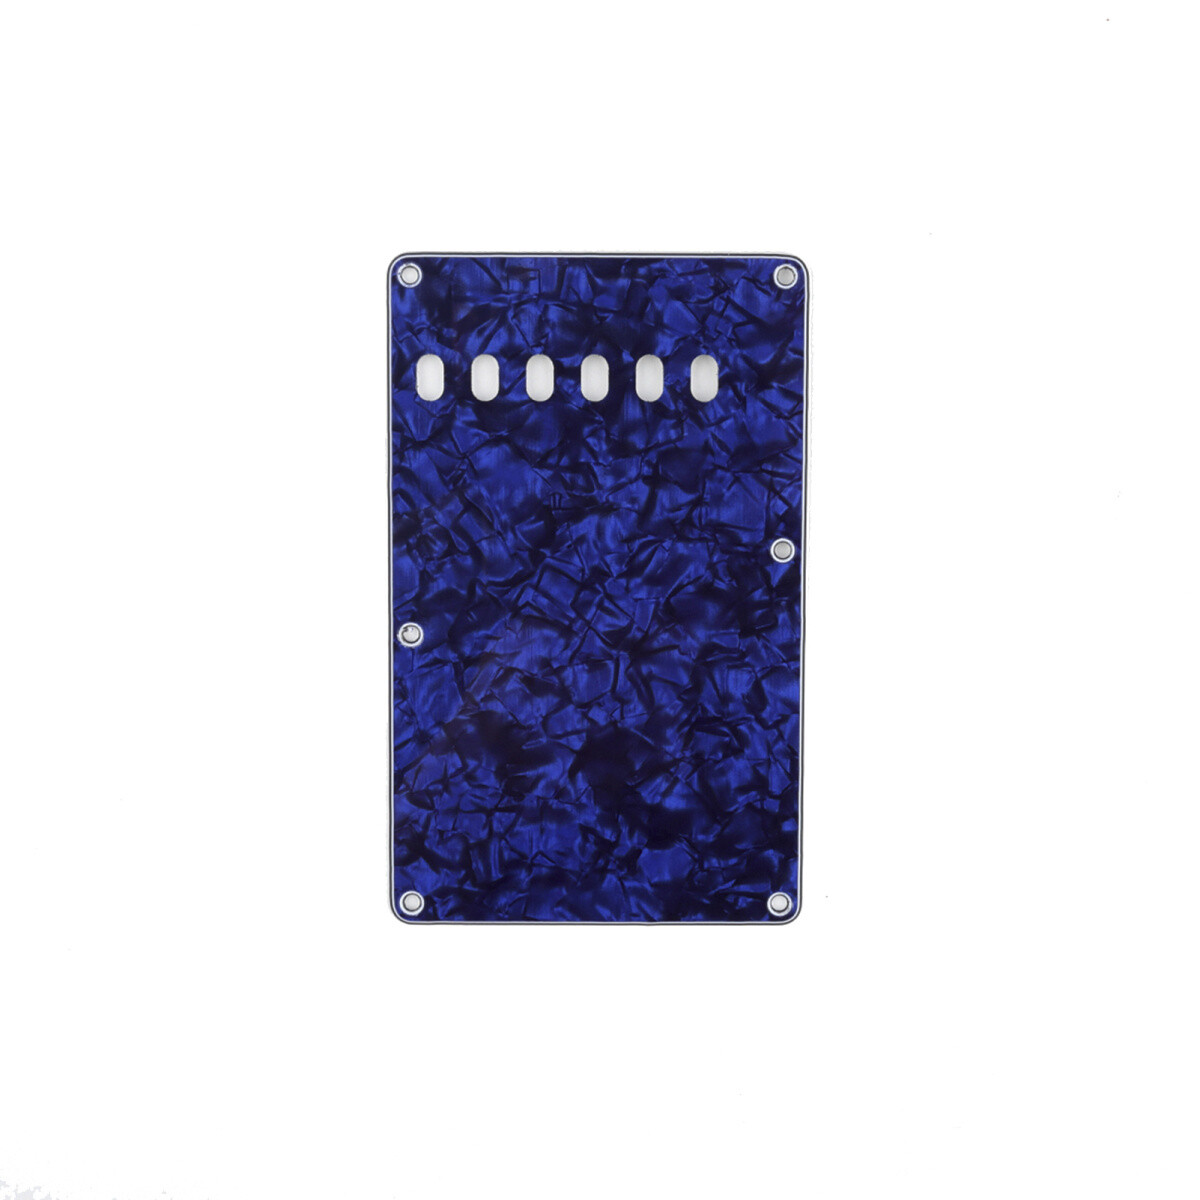 Brio Pearl Blue Vintage Style Back Plate Tremolo Cover 4 ply - US/Mexican Fender®Strat® Fit